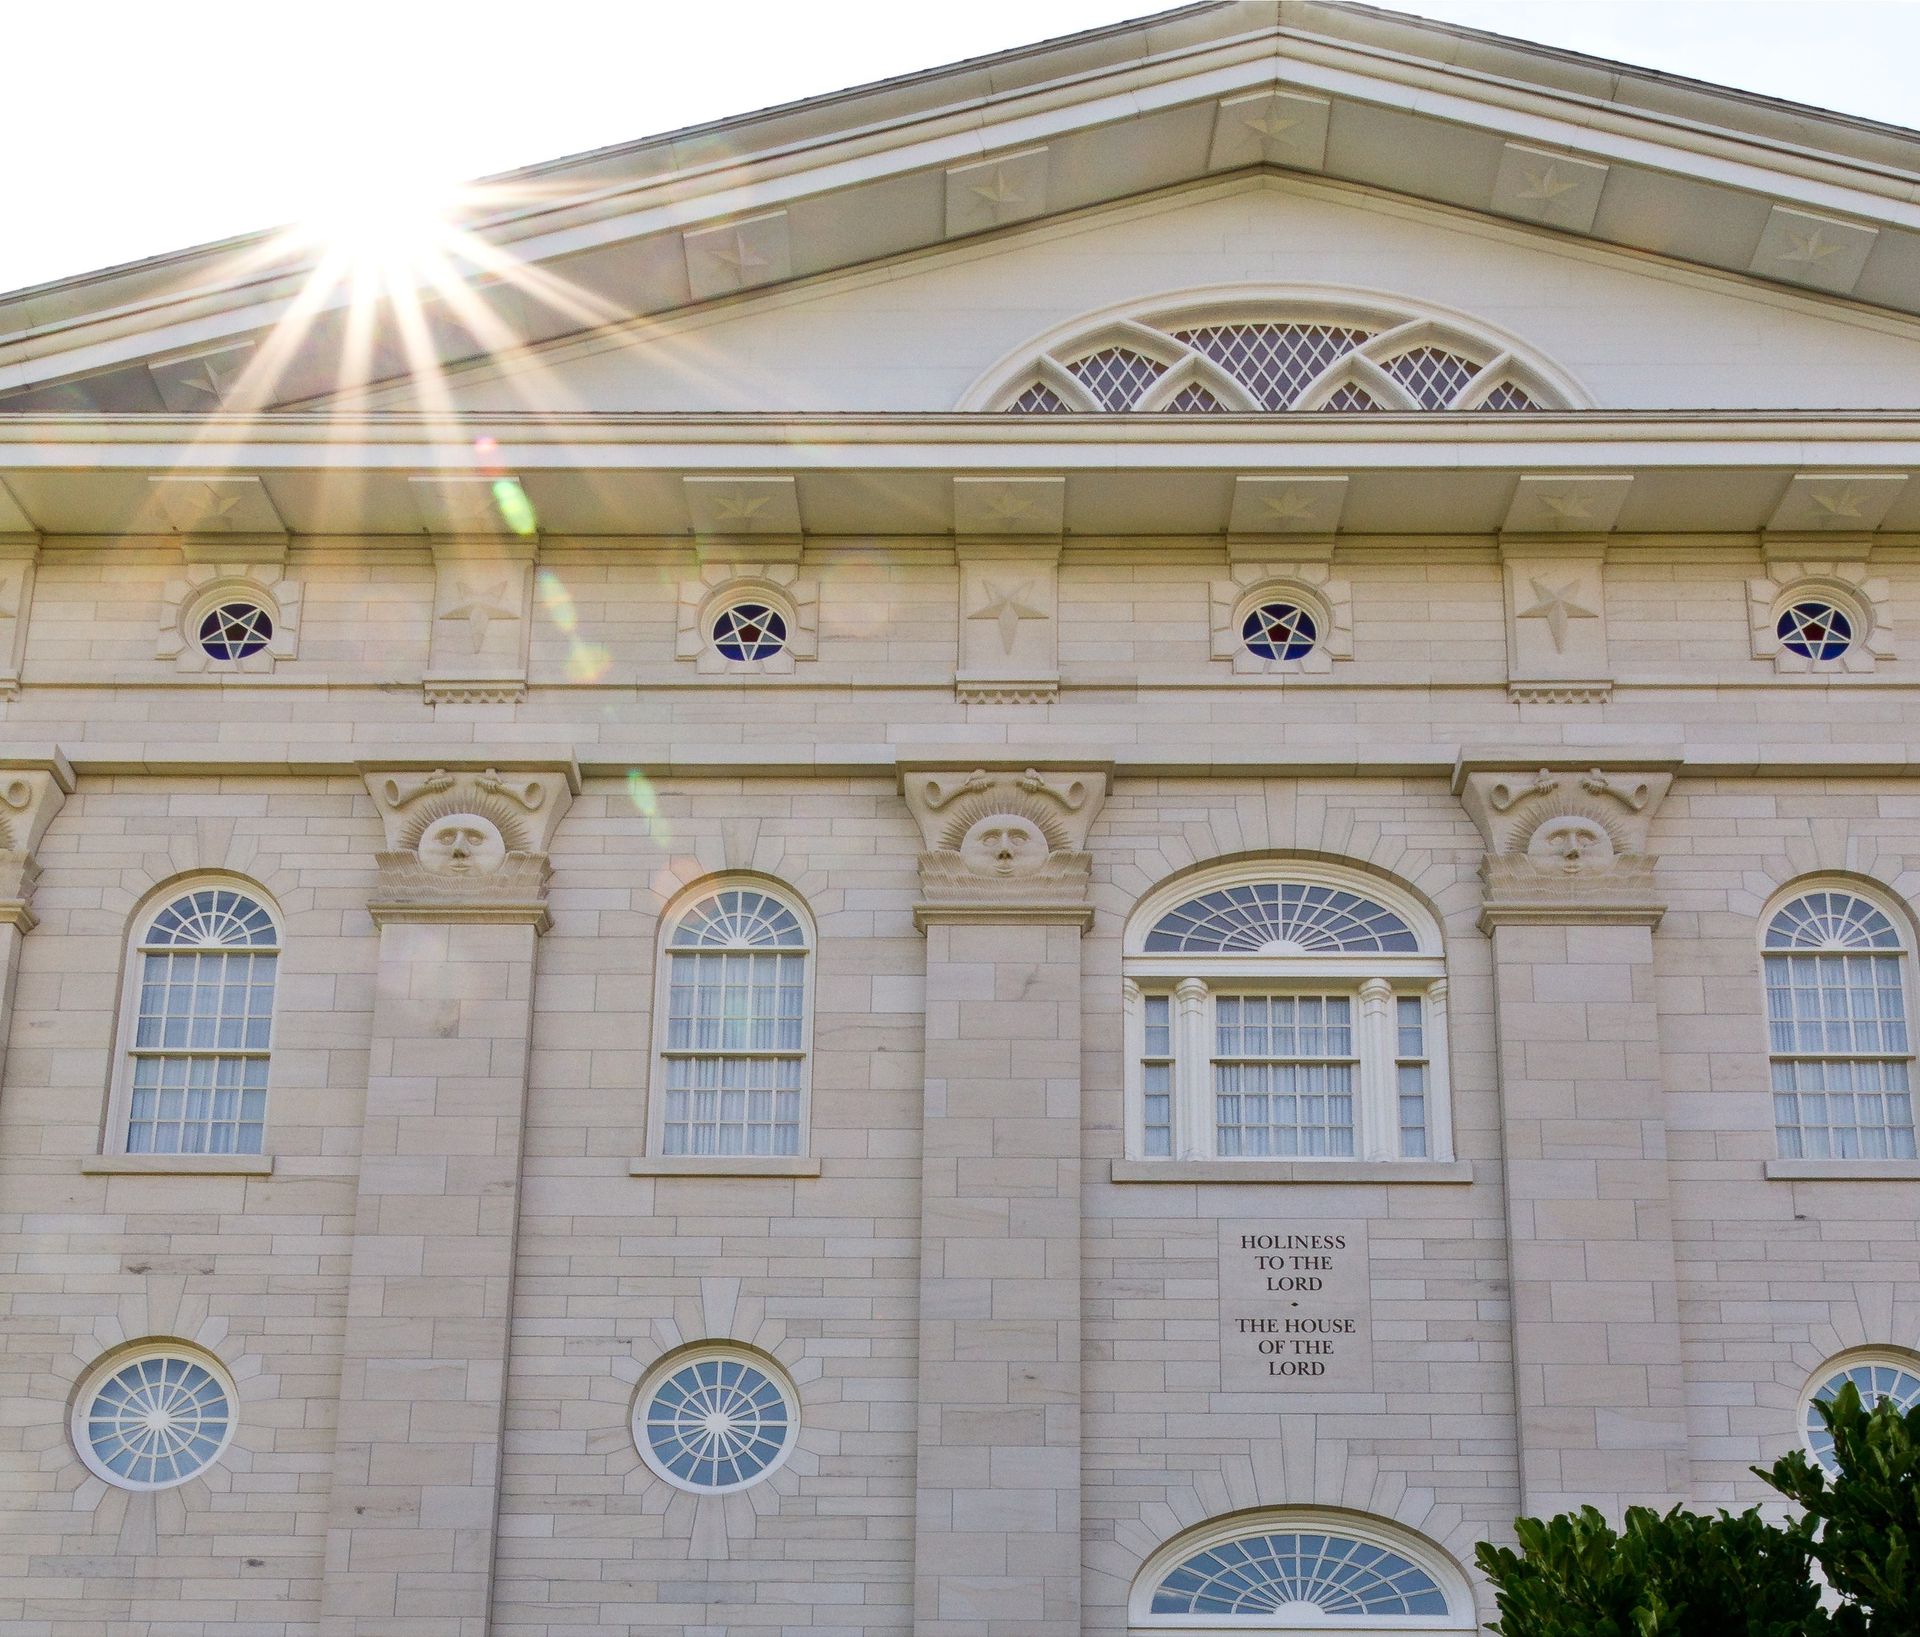 The Nauvoo Illinois Temple exterior, including symbols.